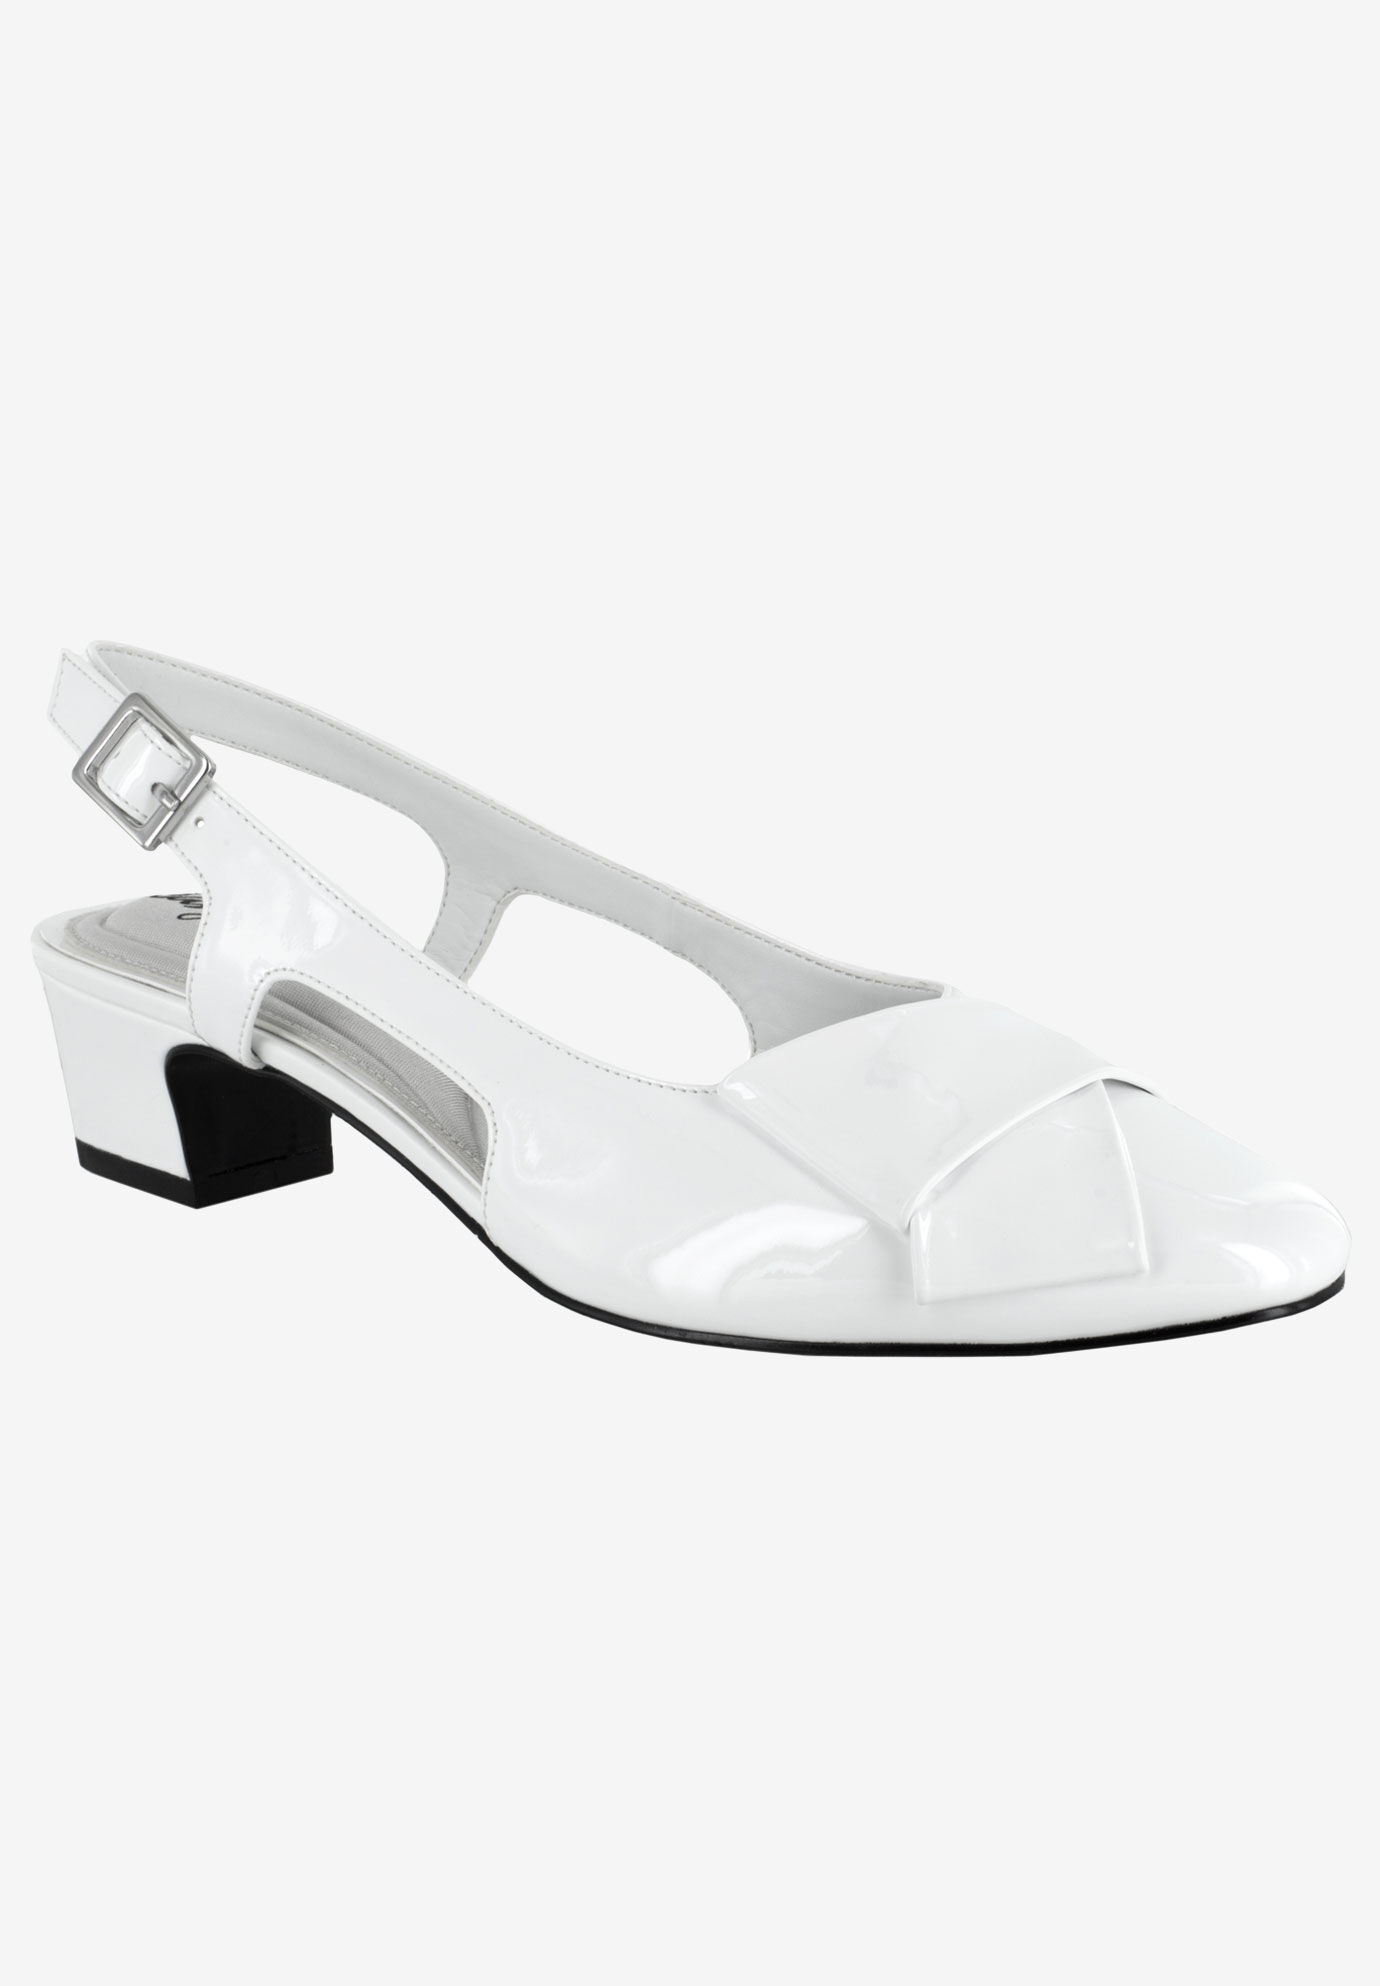 Extra Wide Width Women's Breanna Sling by Easy Street in White Patent (Size 7 WW)